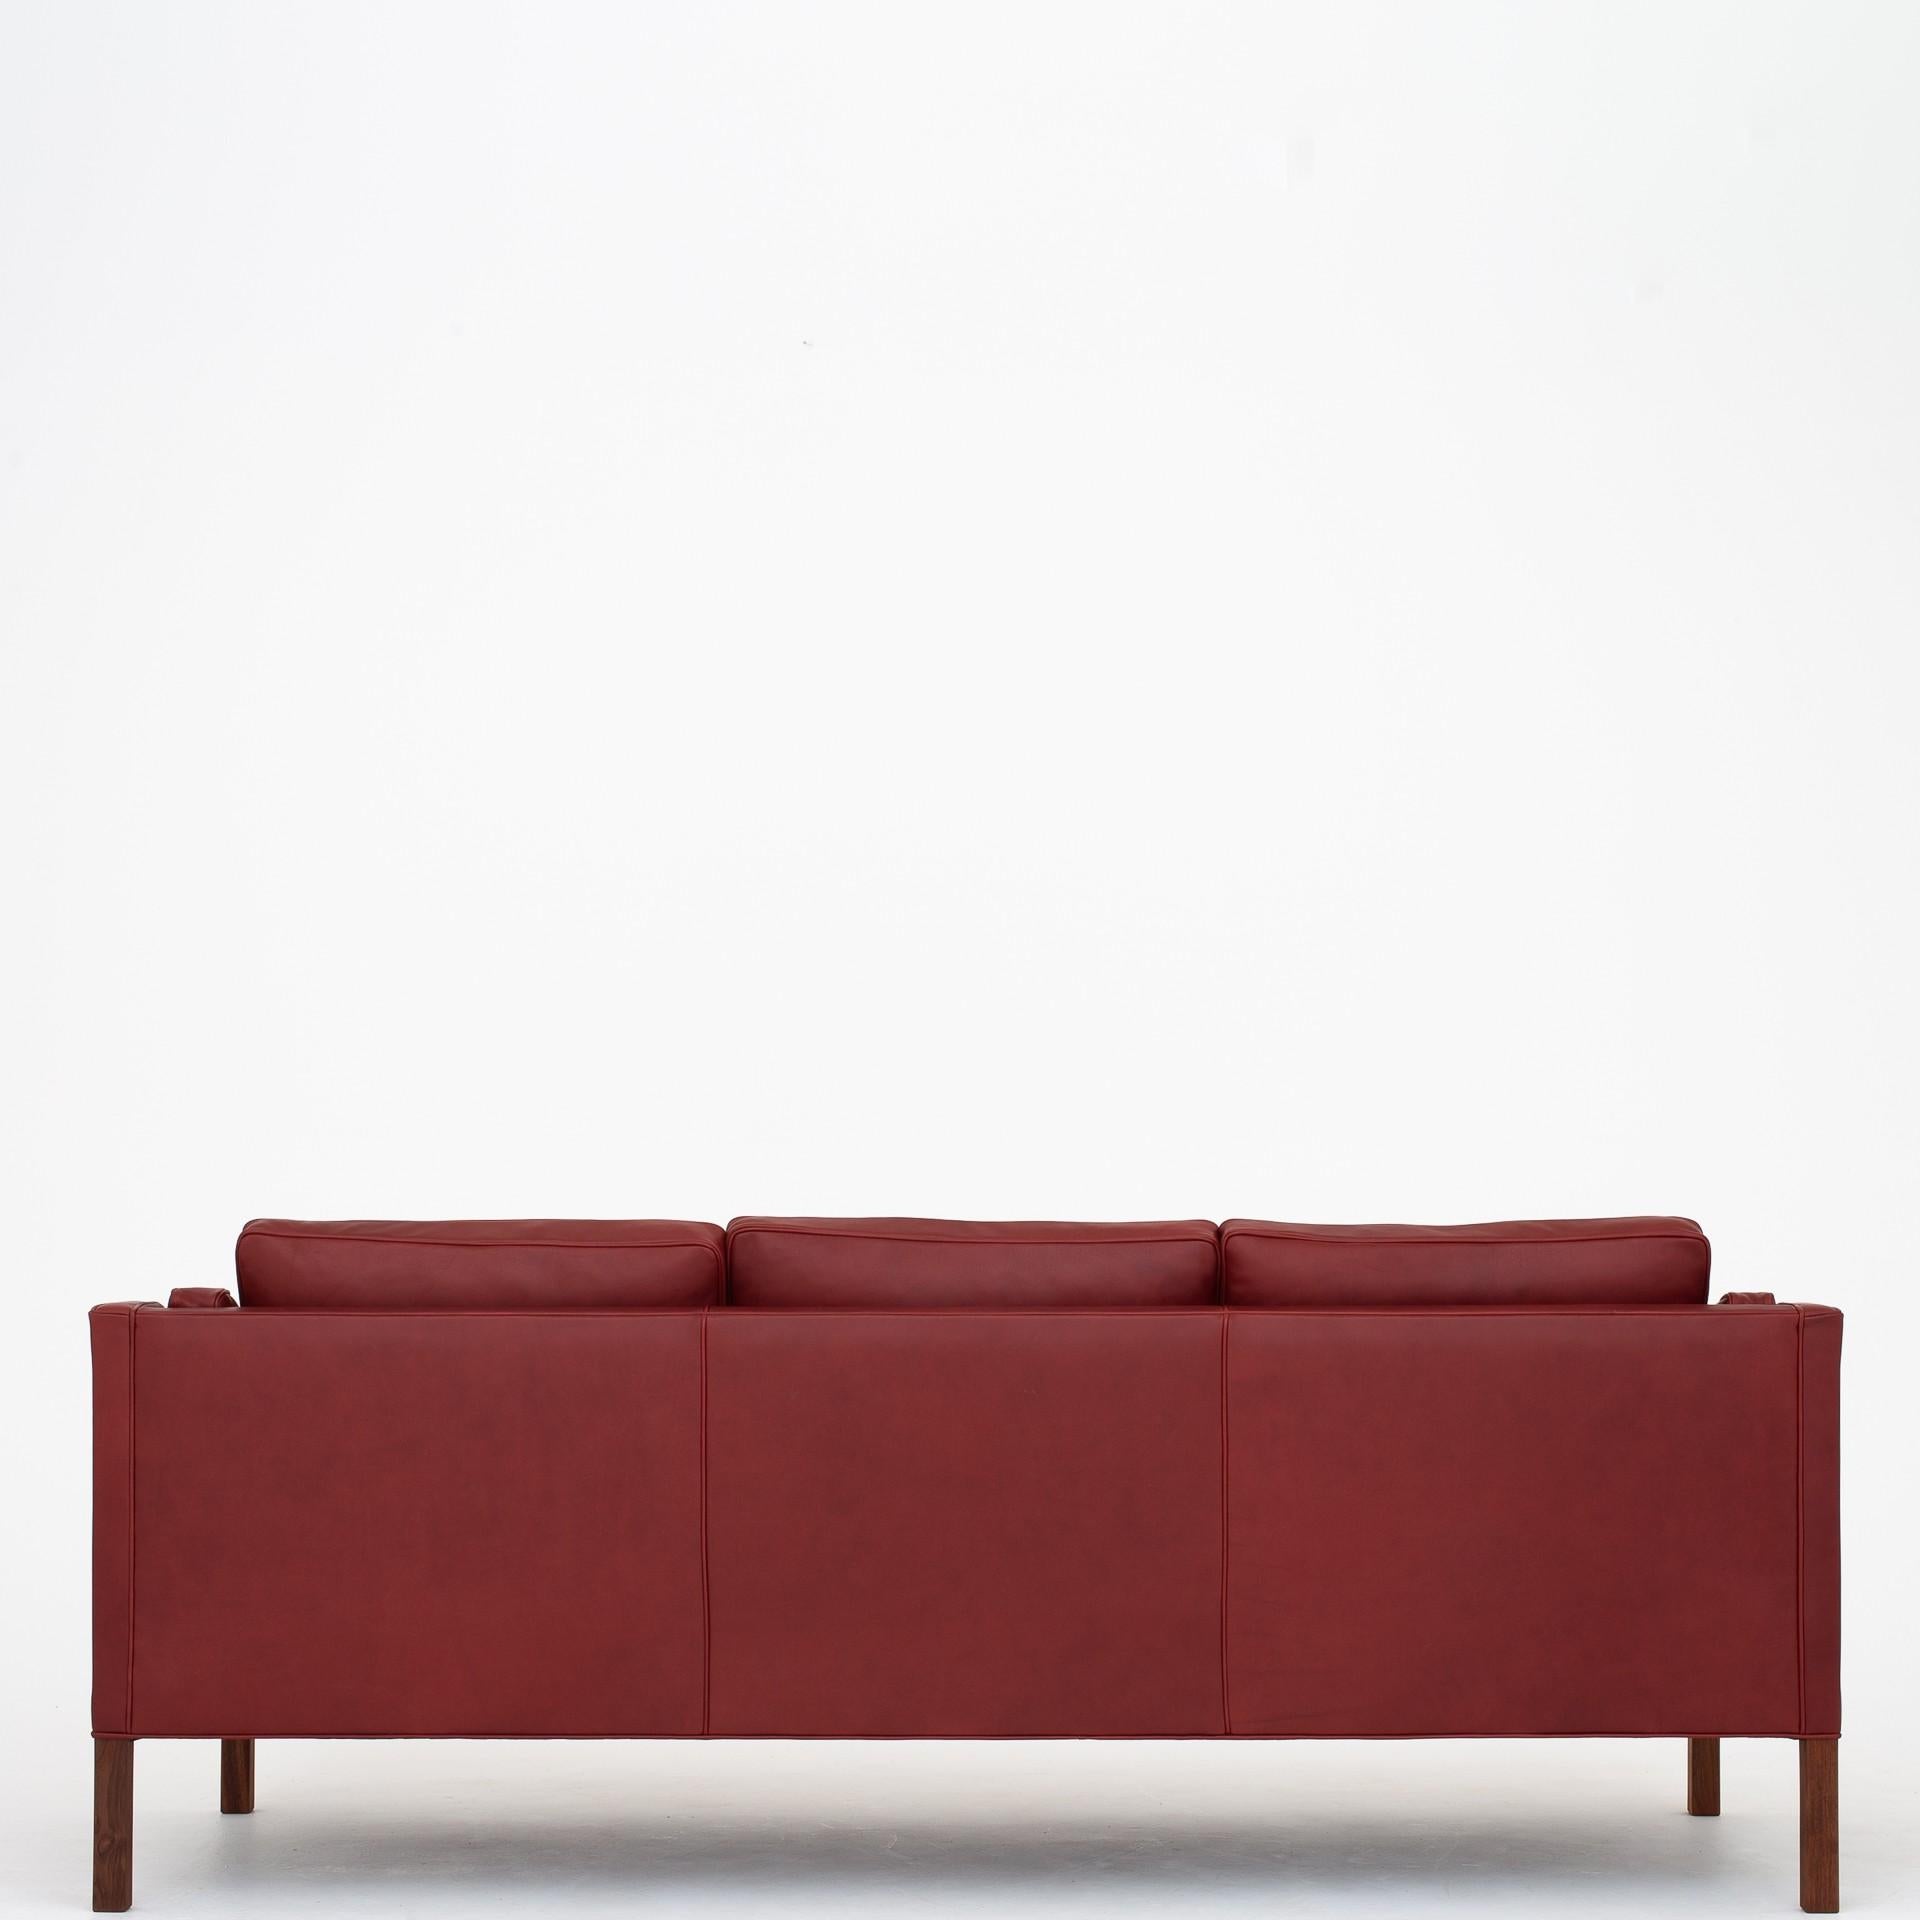 BM 2213, reupholstered 3-seat sofa in elegance Indian red leather. Maker Fredericia Furniture.